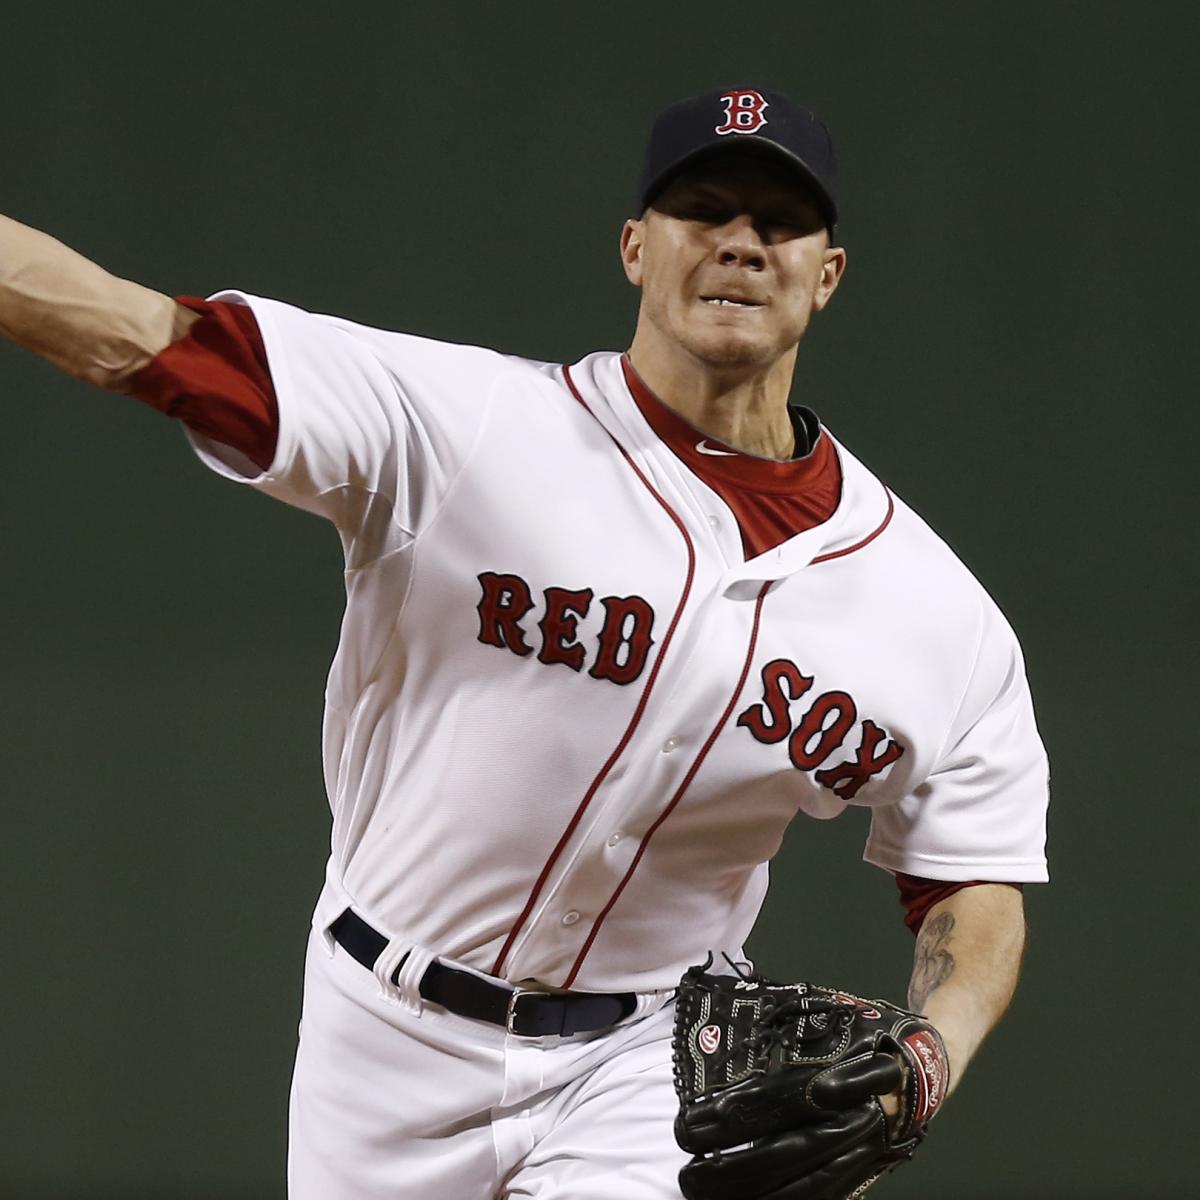 MLB Playoffs 2013: Jake Peavy and Other X-Factors Heading into